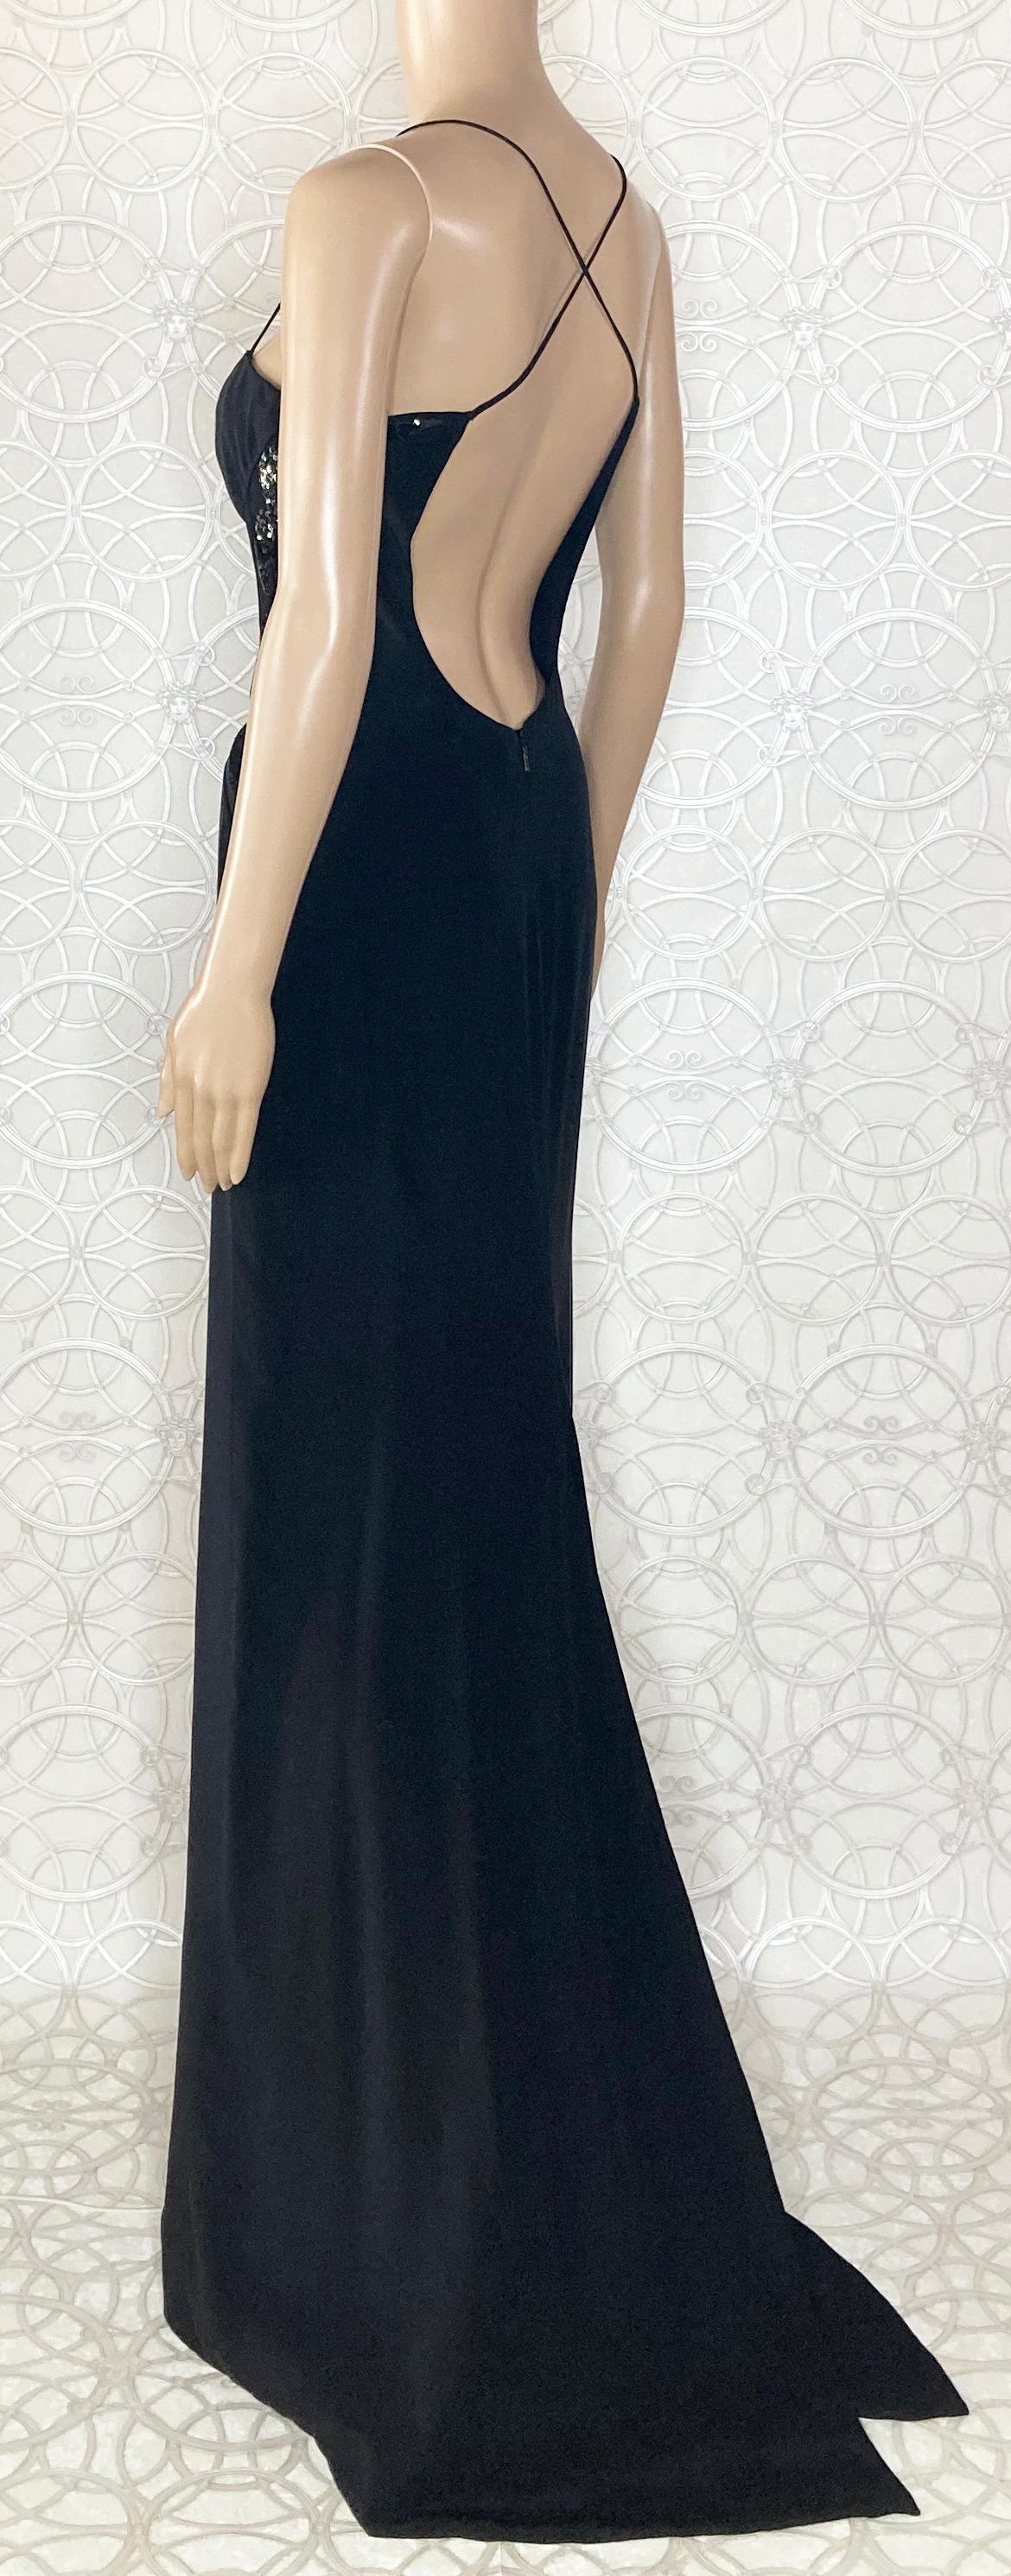 VERSACE BLACK PAILLETE DETAIL and OPEN BACK SILK LONG GOWN Dress 38 -2 In New Condition For Sale In Montgomery, TX